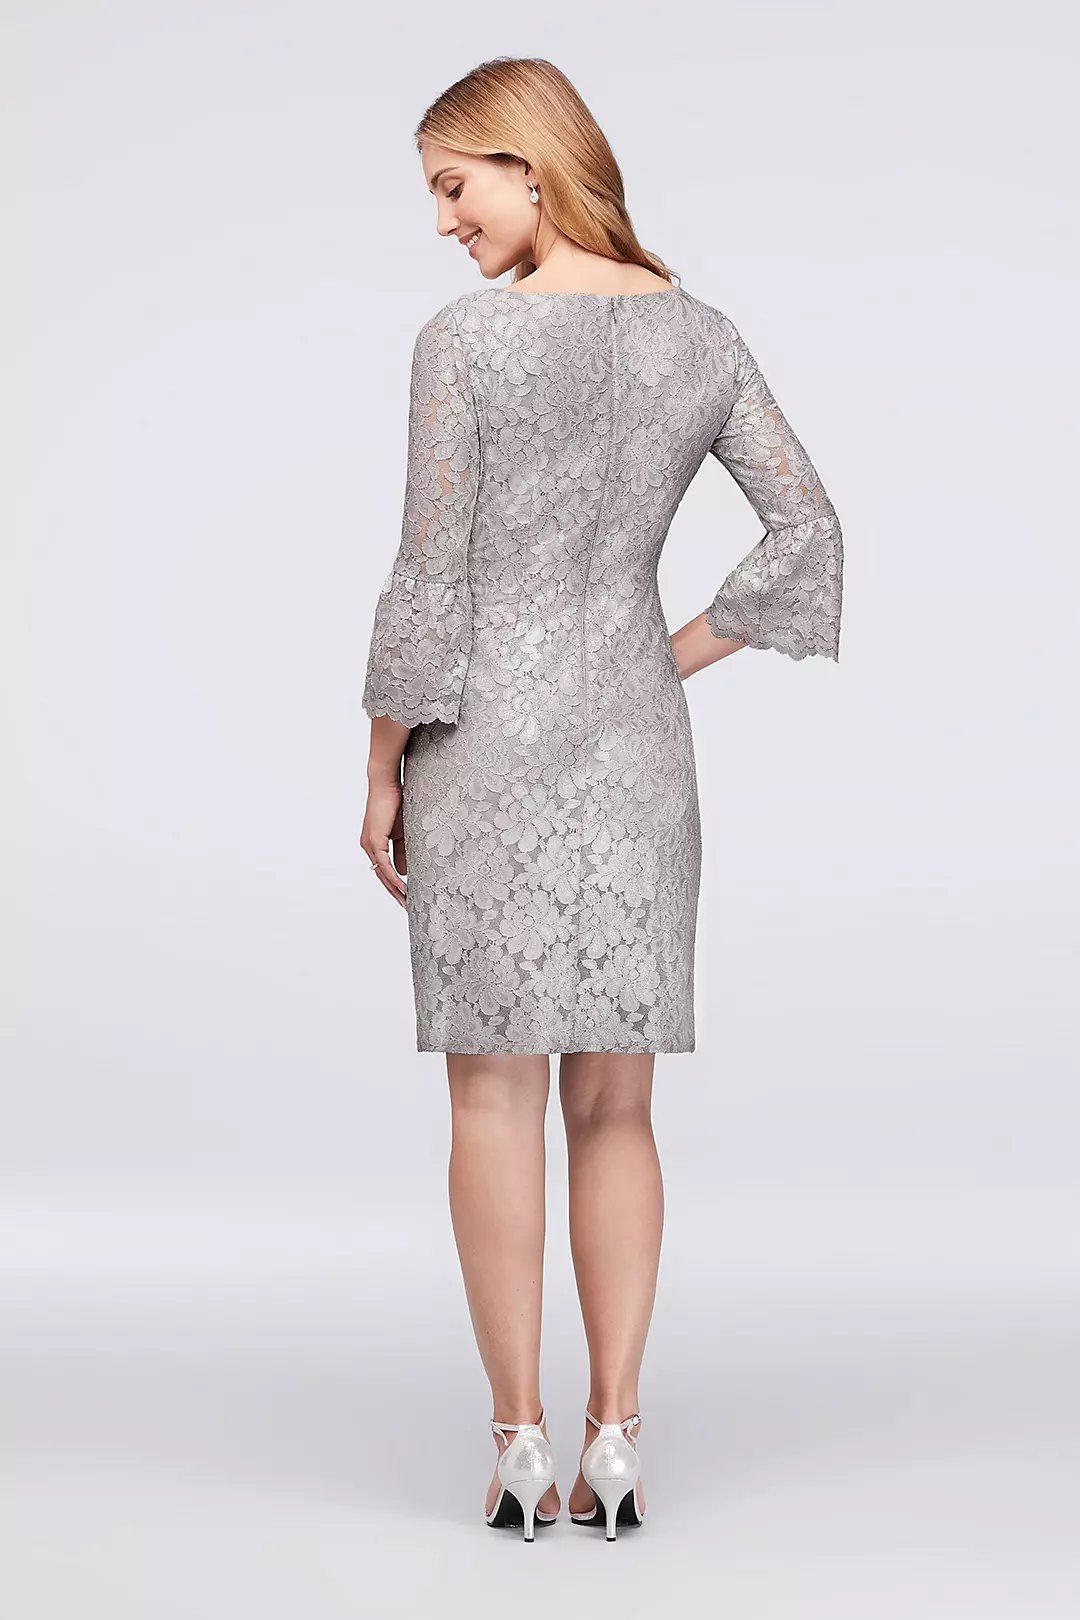 Metallic Lace Cocktail Dress with 3/4 Bell Sleeves | David's Bridal